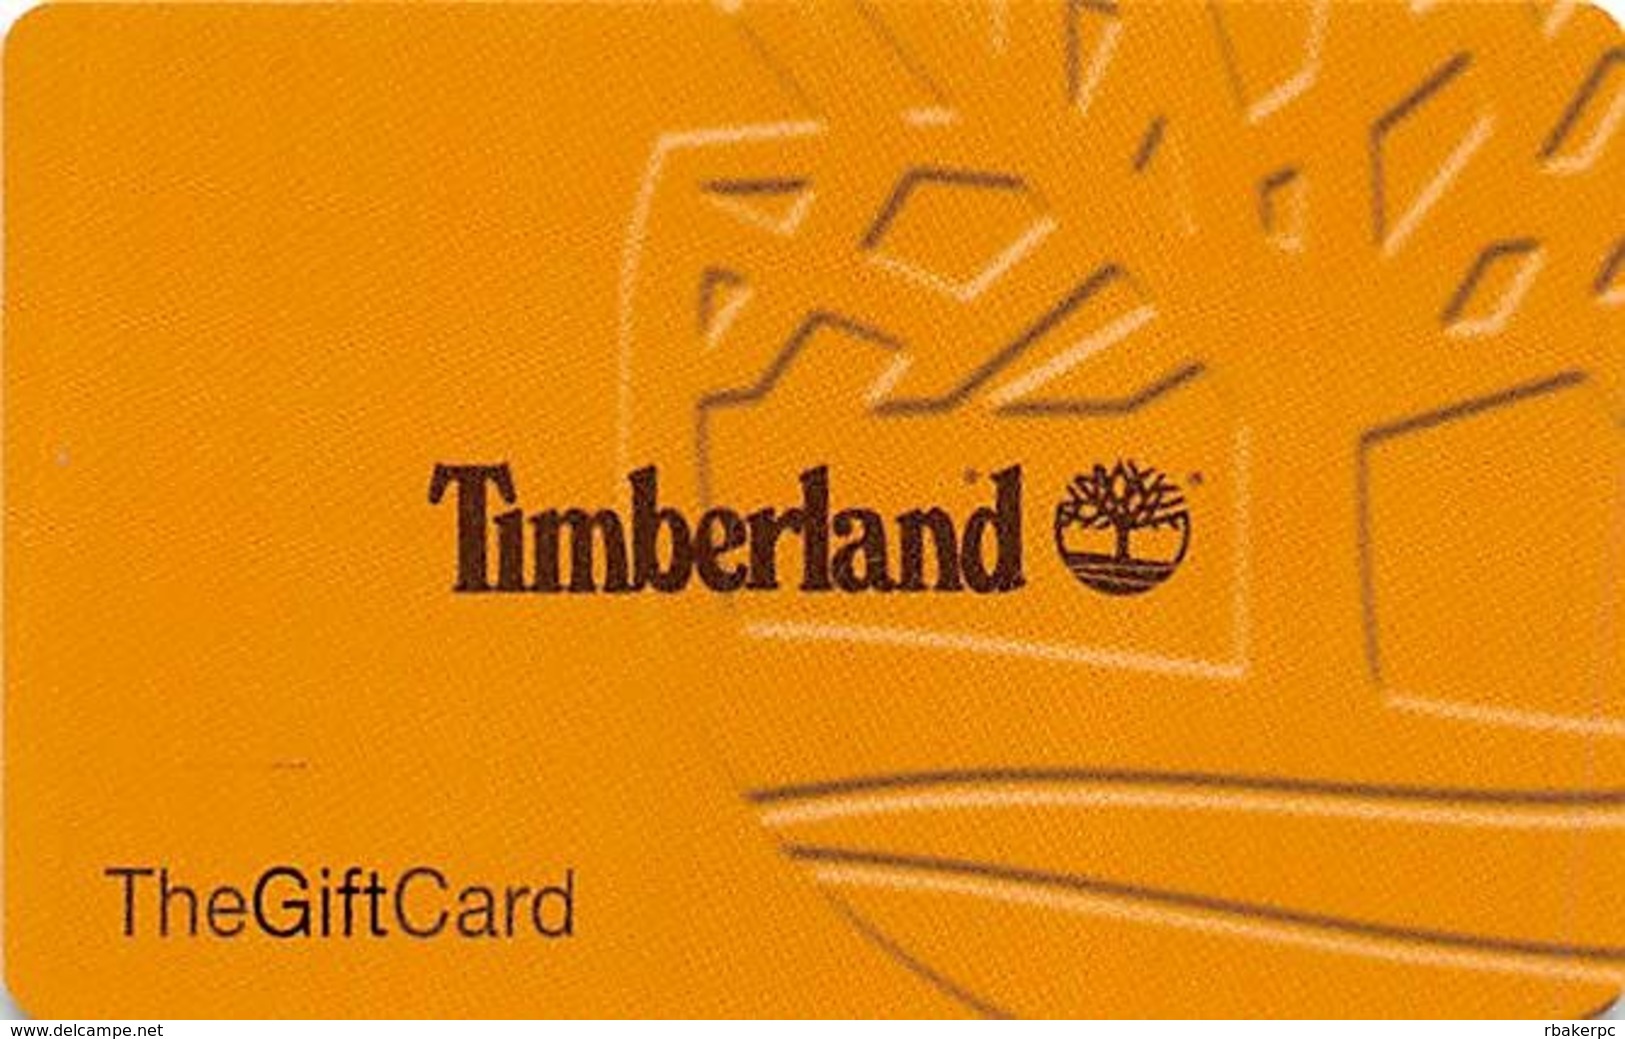 Timberland Gift Card - Gift Cards